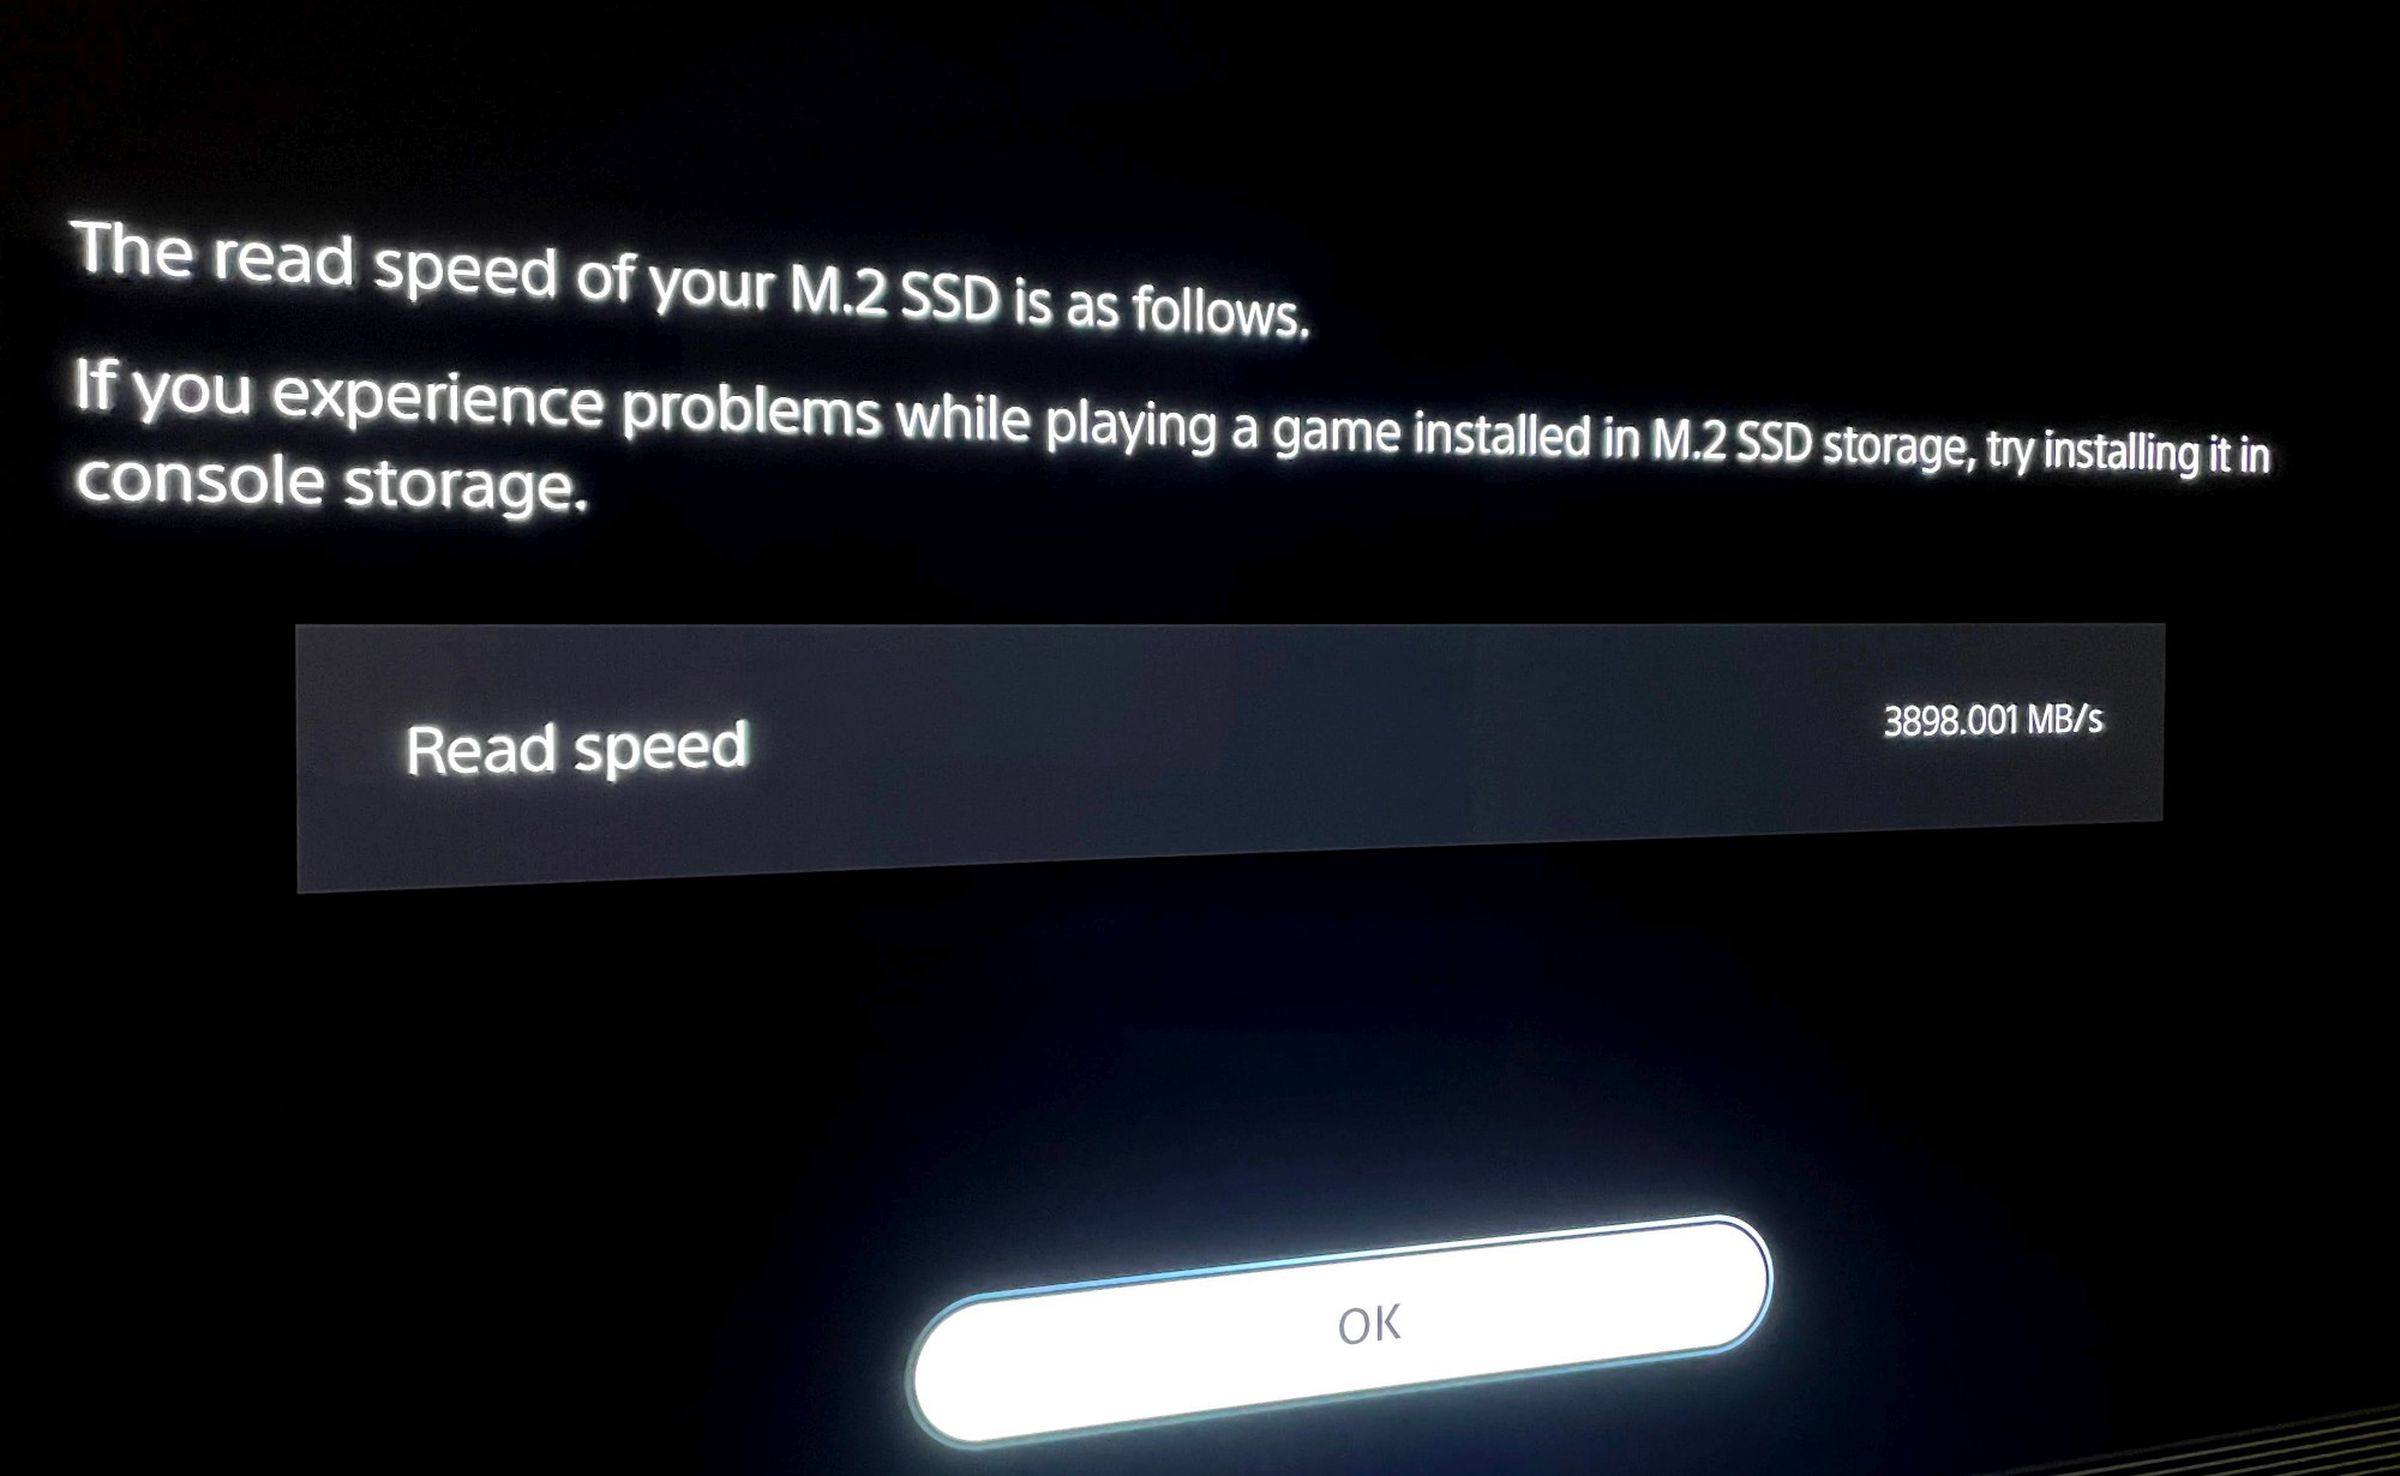 The PS5 reads 3898.001 megabytes per second in its speed test